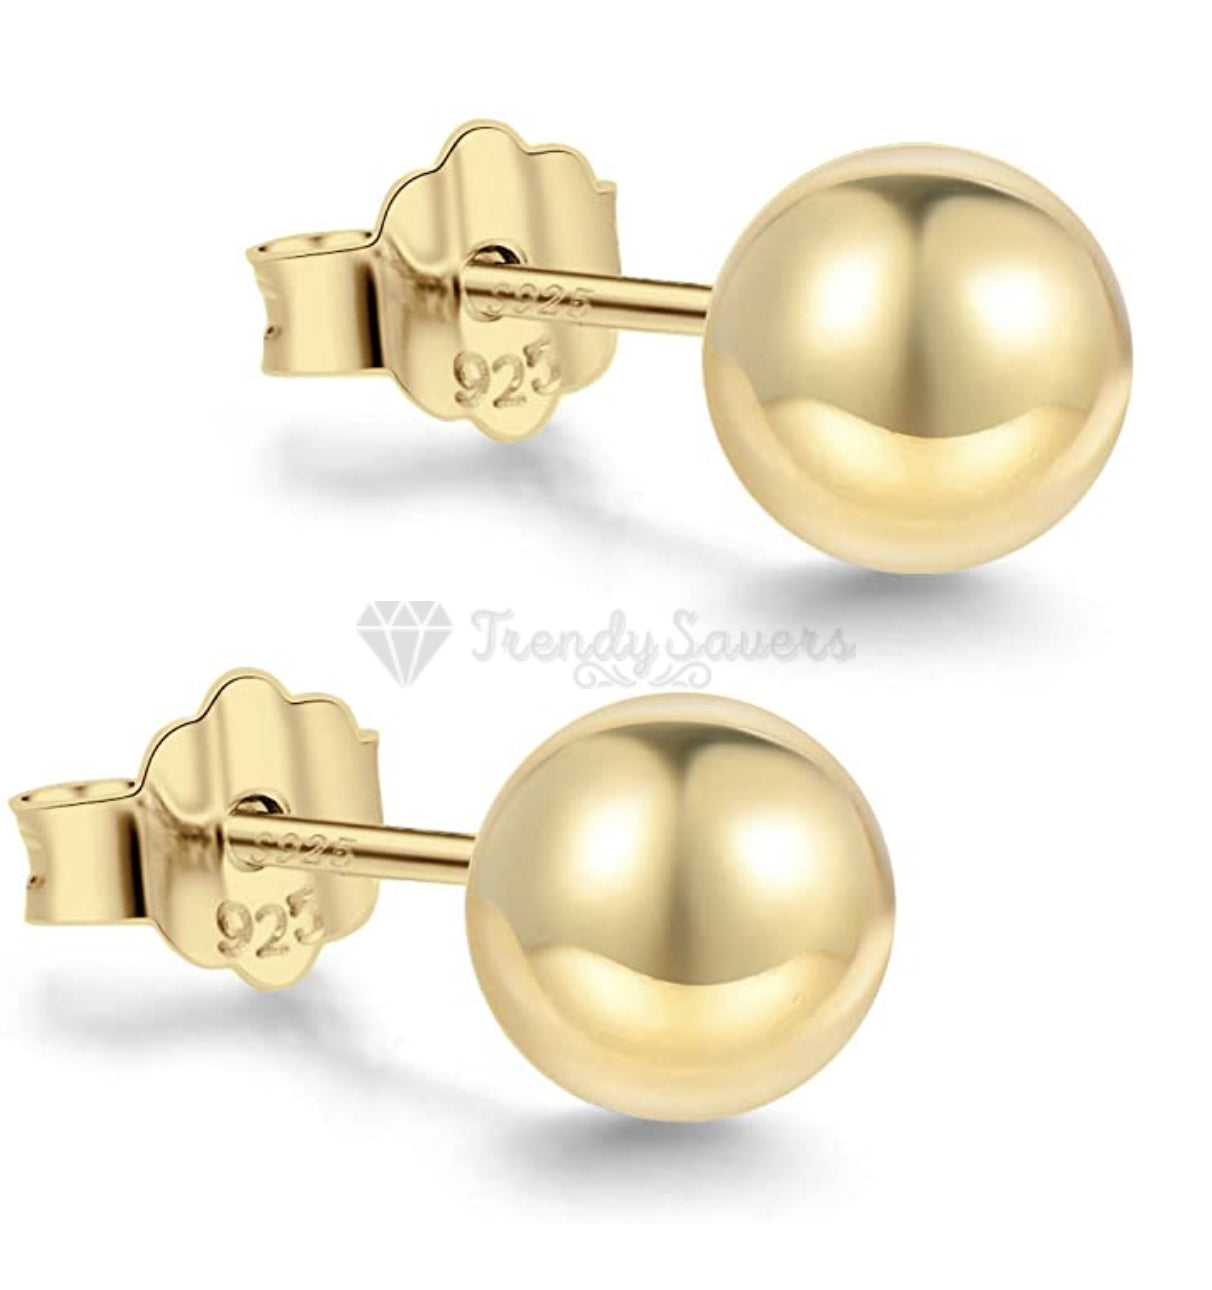 Simple Gold Polished 8MM Ball 925 Sterling Silver Stud Earrings Hypoallergenic